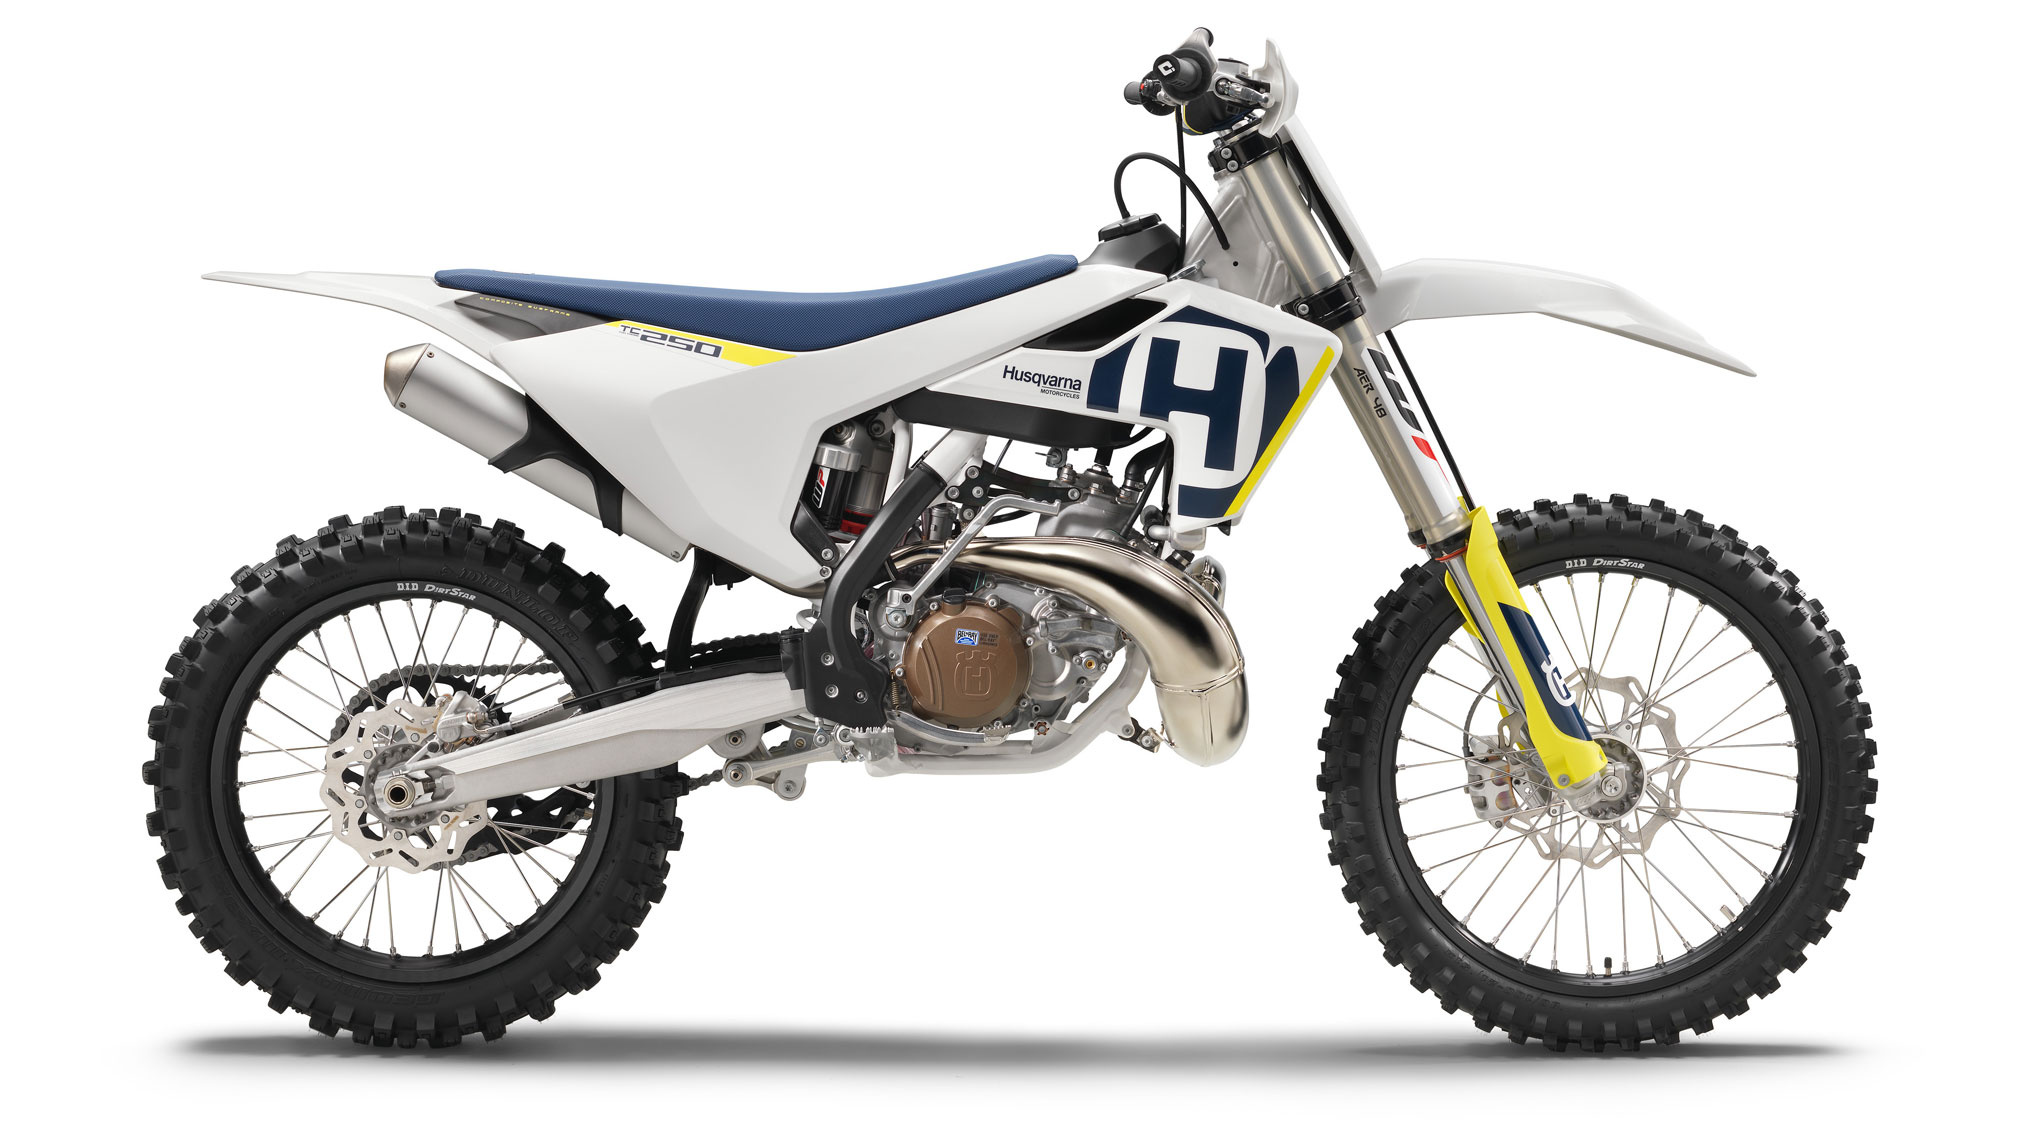 Husqvarna TC, Exciting motocross machine, Refined performance, Total Motorcycle review, 2020x1150 HD Desktop